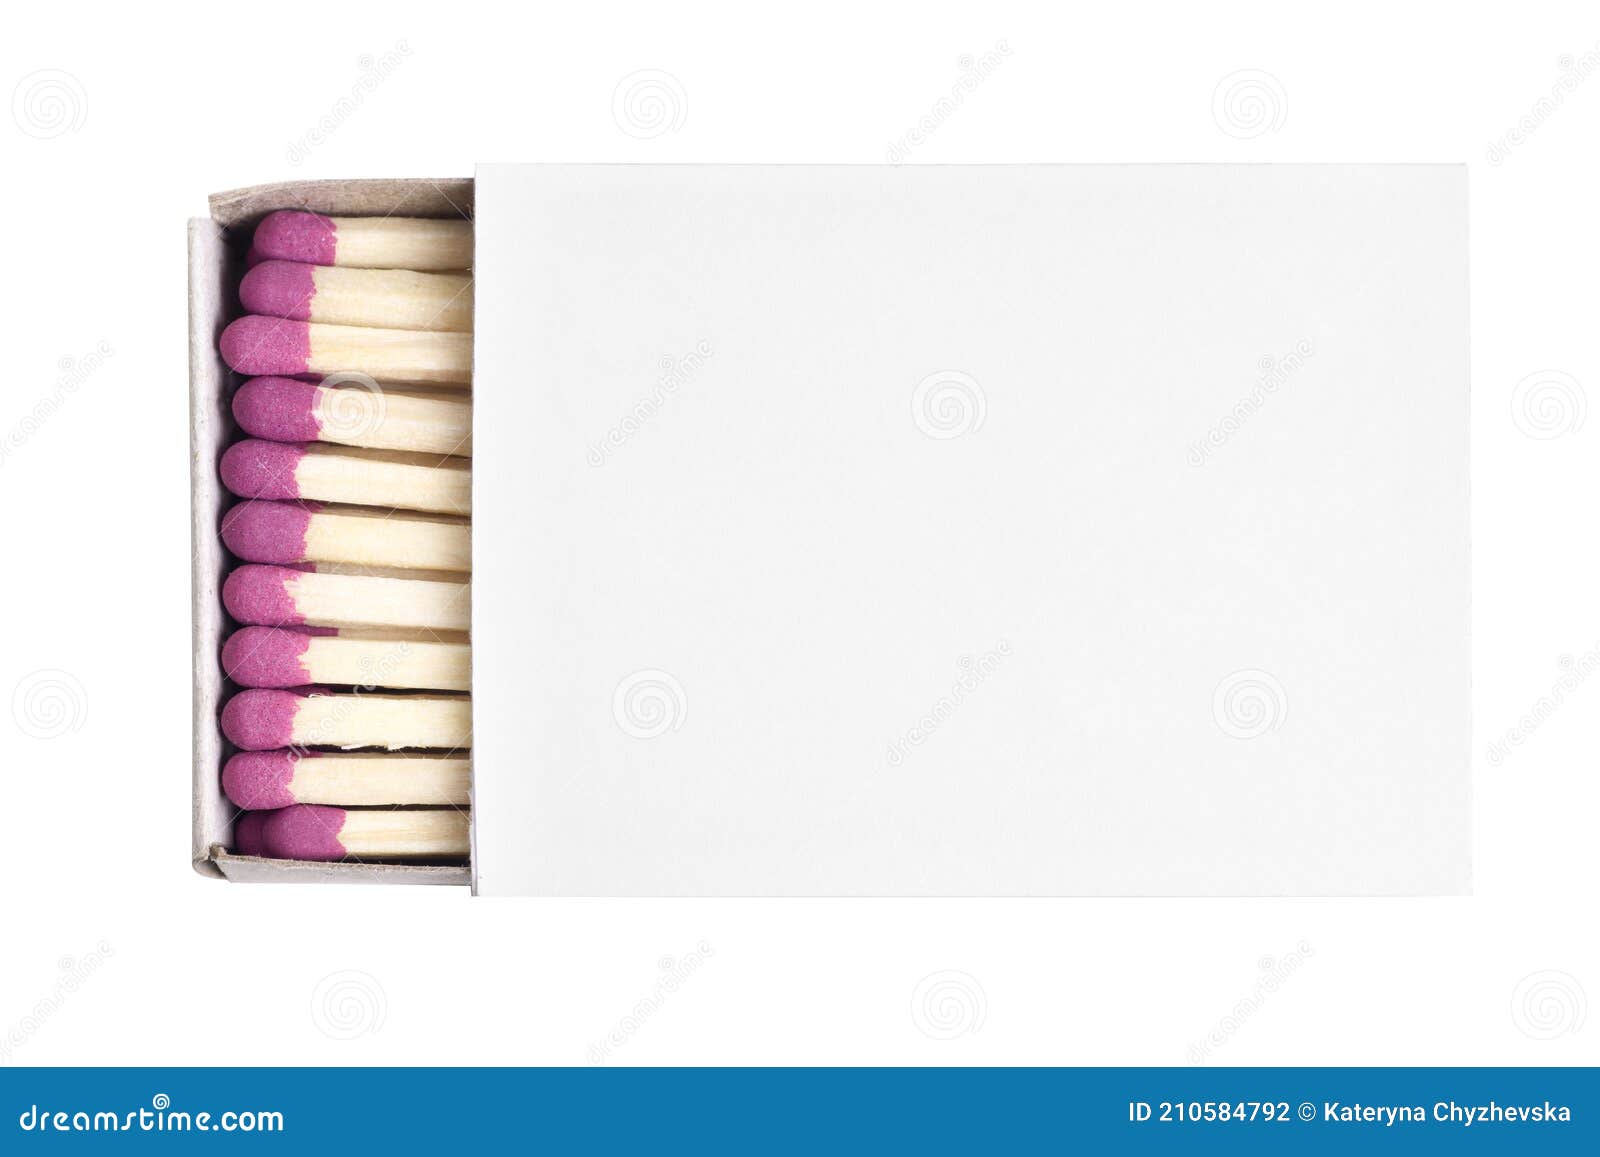 Blank Matches Box Mock Up Isolated Empty Paper Match Packaging